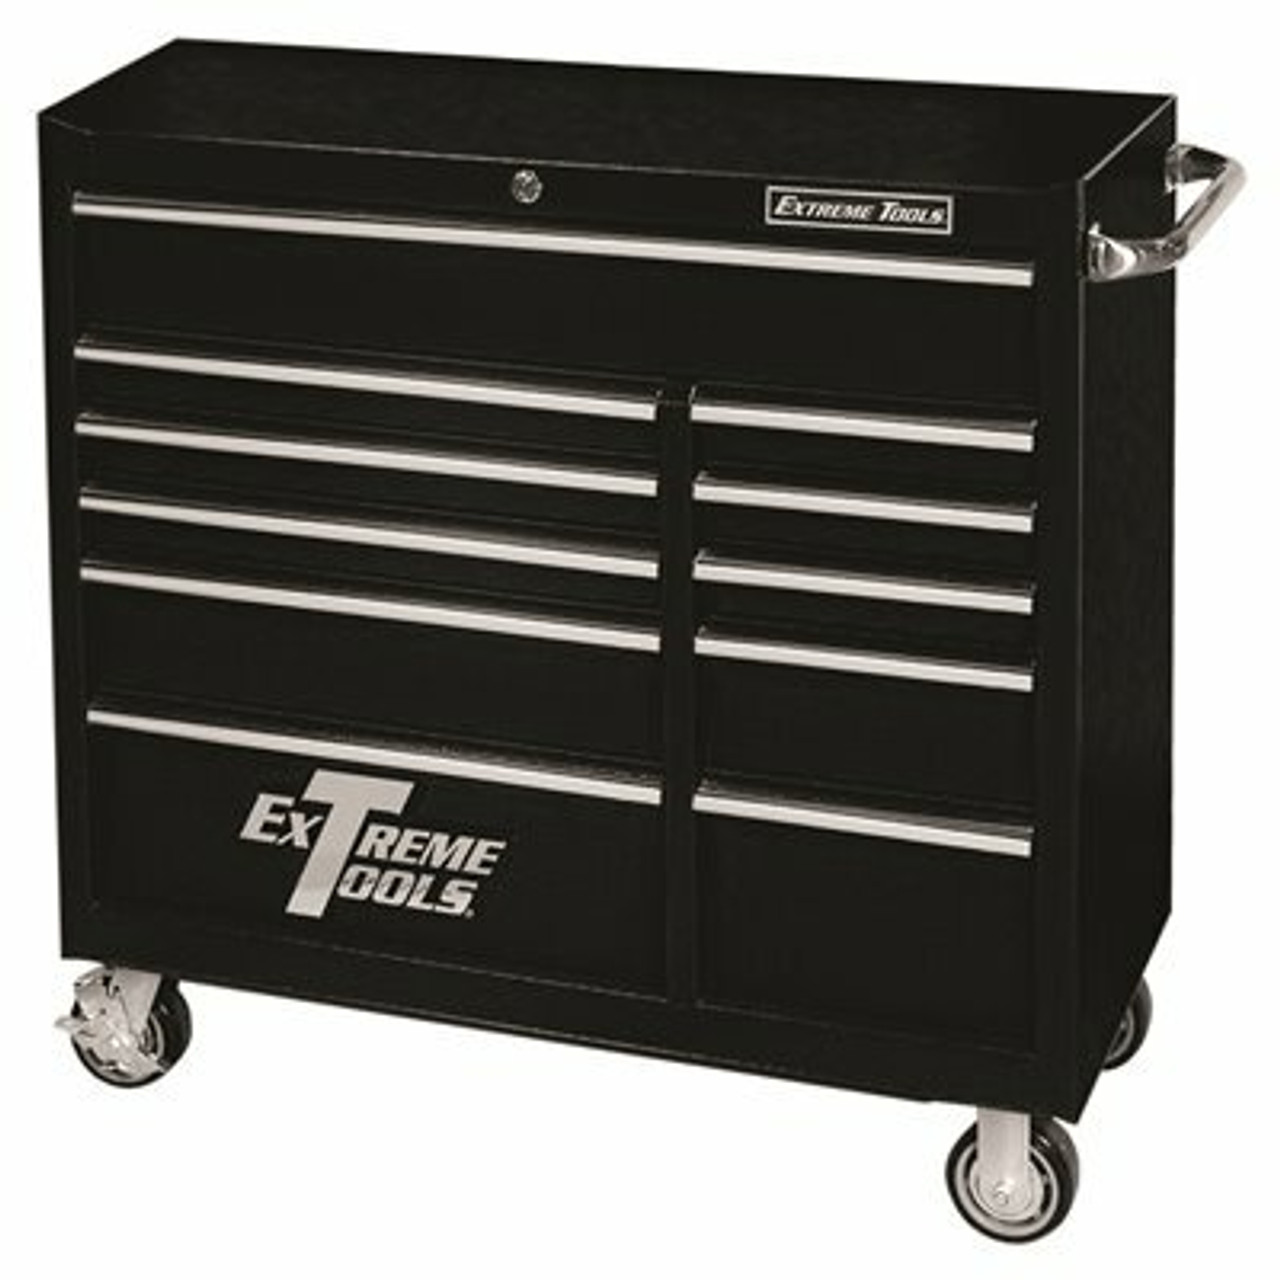 Extreme Tools 41 In. 11-Drawer Standard Roller Cabinet Tool Chest In Textured Black